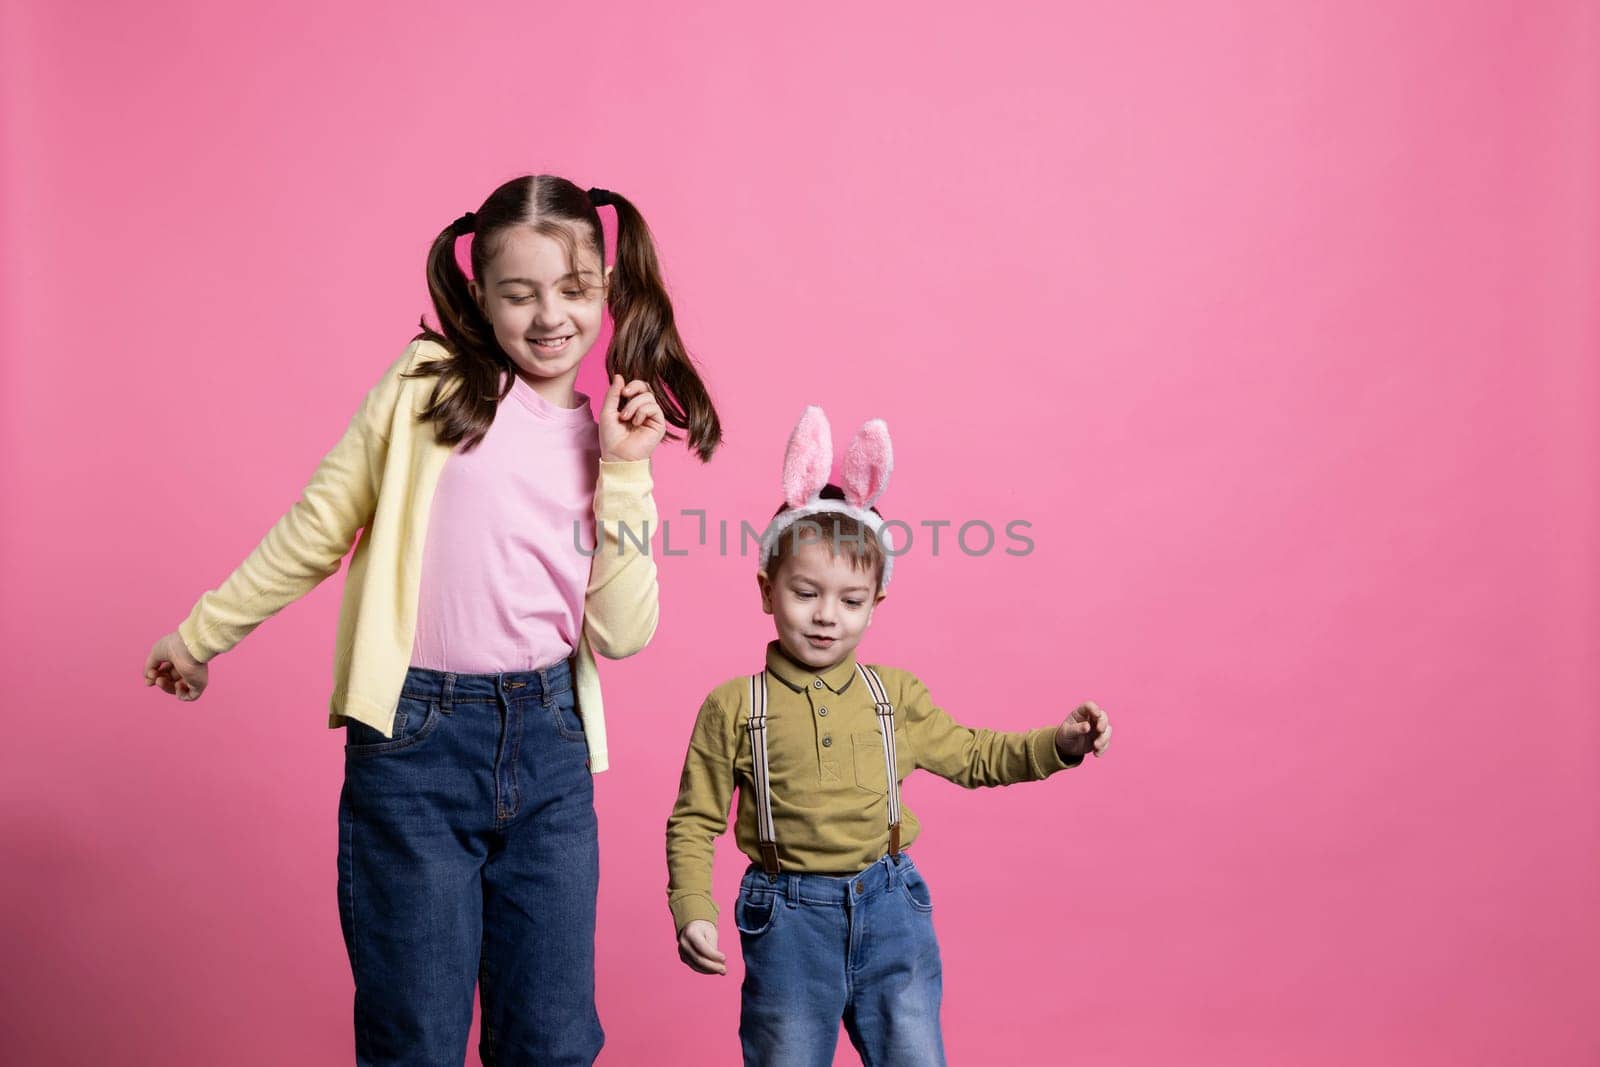 Cute young children dancing around in front of camera, feeling happy and curious about easter celebration or gifts. Brother and sister enjoying spring holiday, little boy wearing bunny ears.